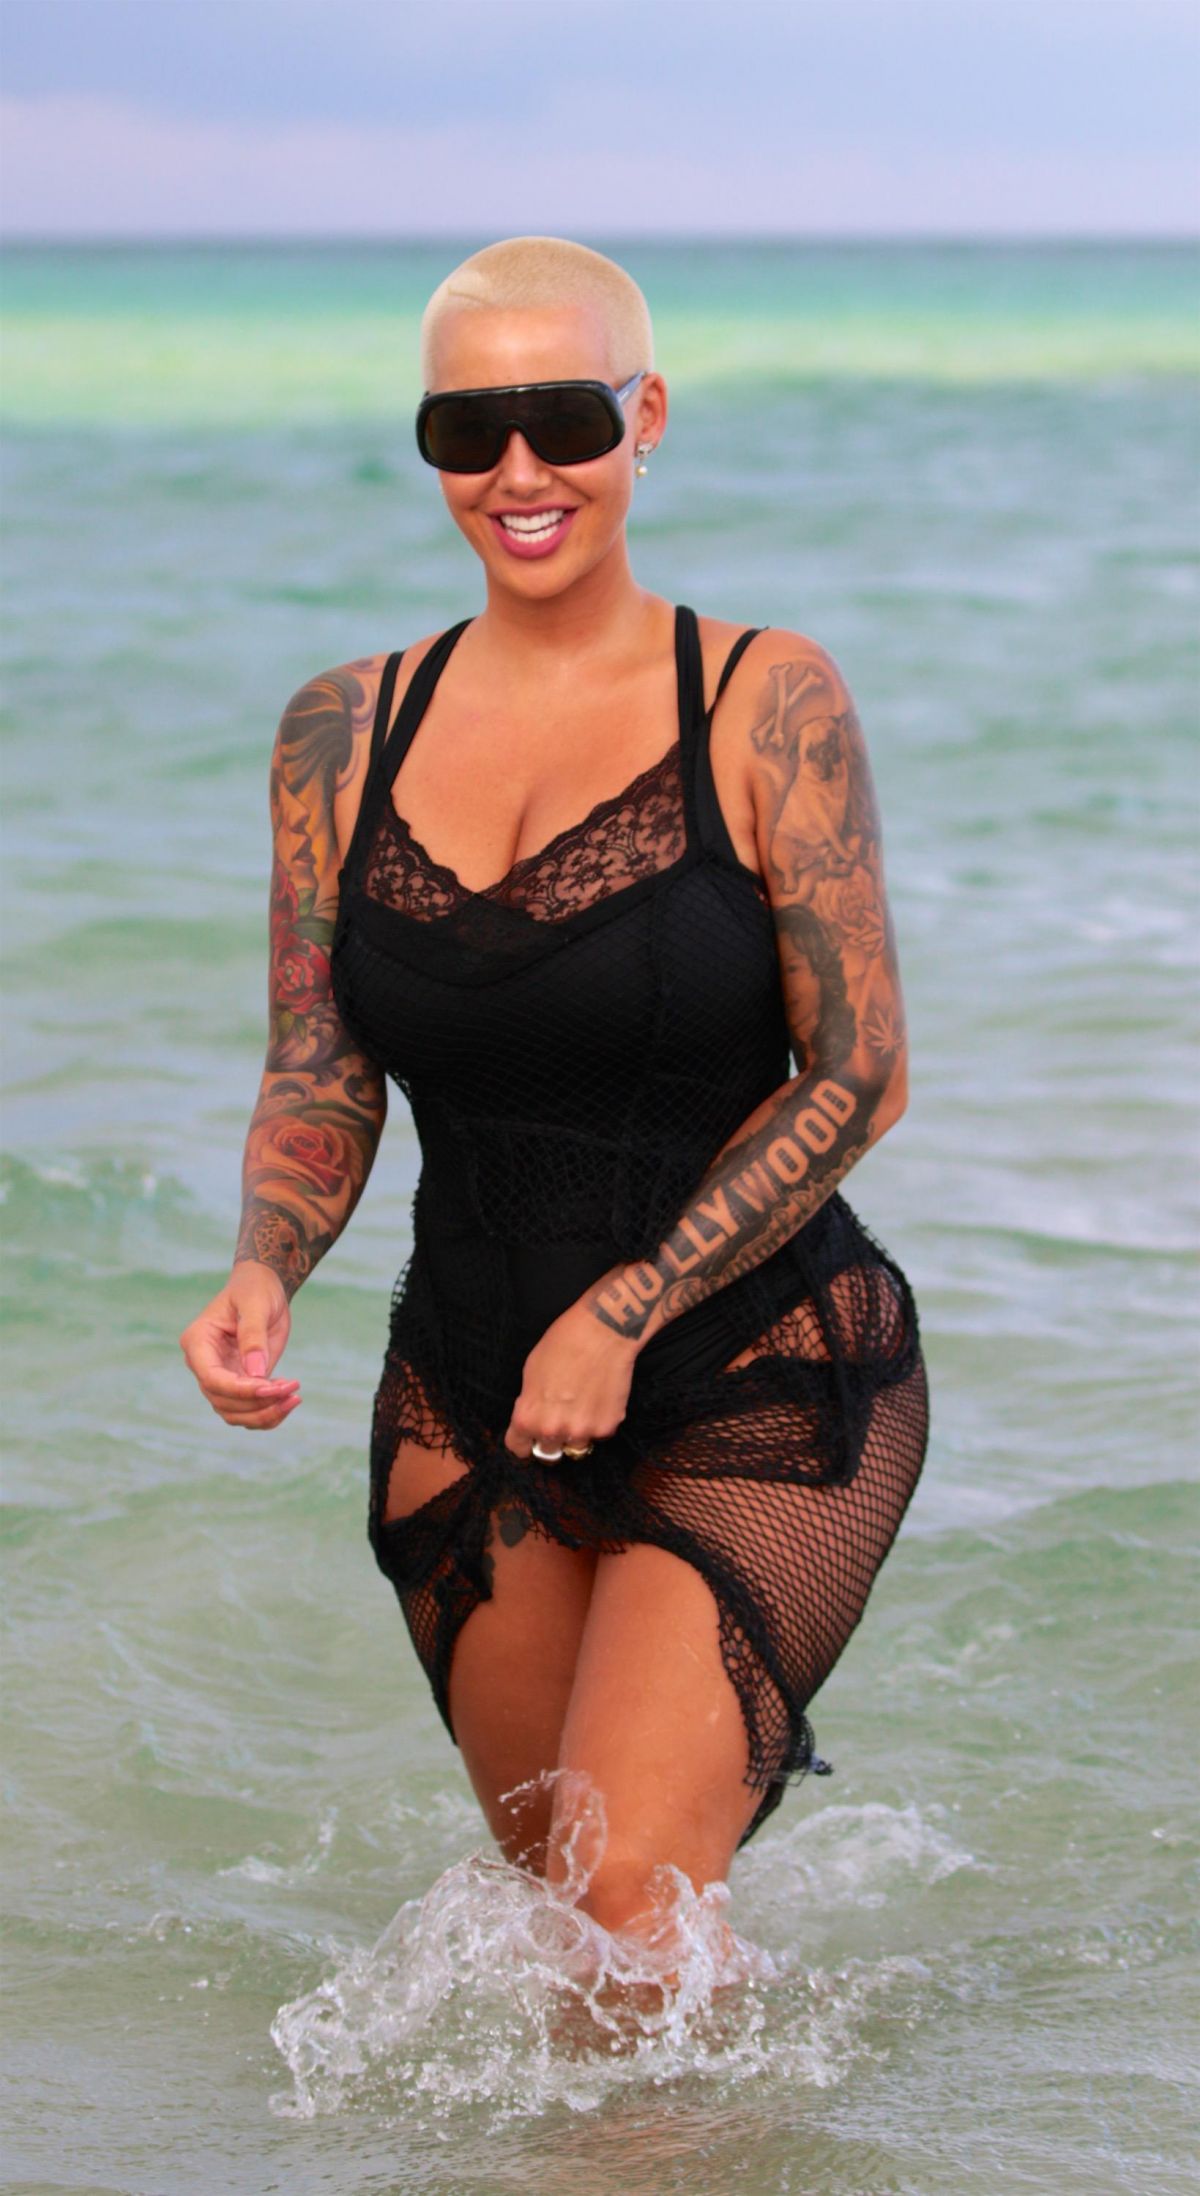 amber-rose-at-a-beach-in-miami-05-14-2017_1.